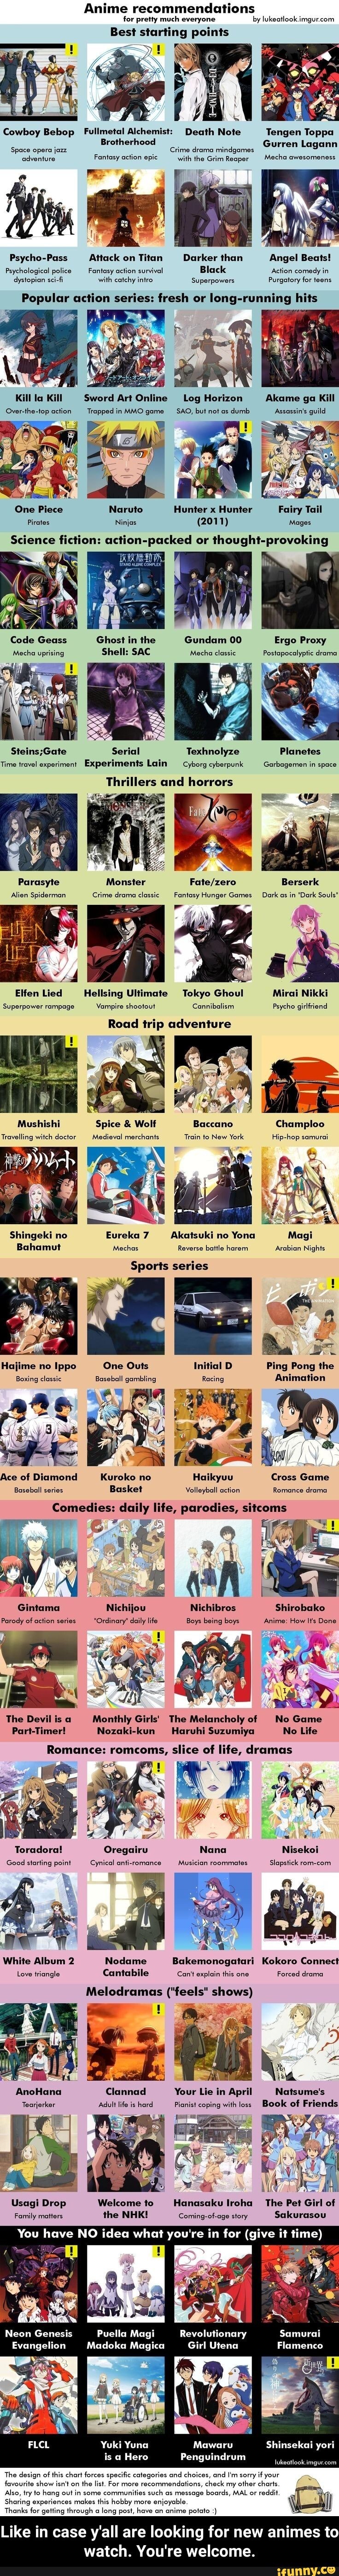 Anime Recommendations